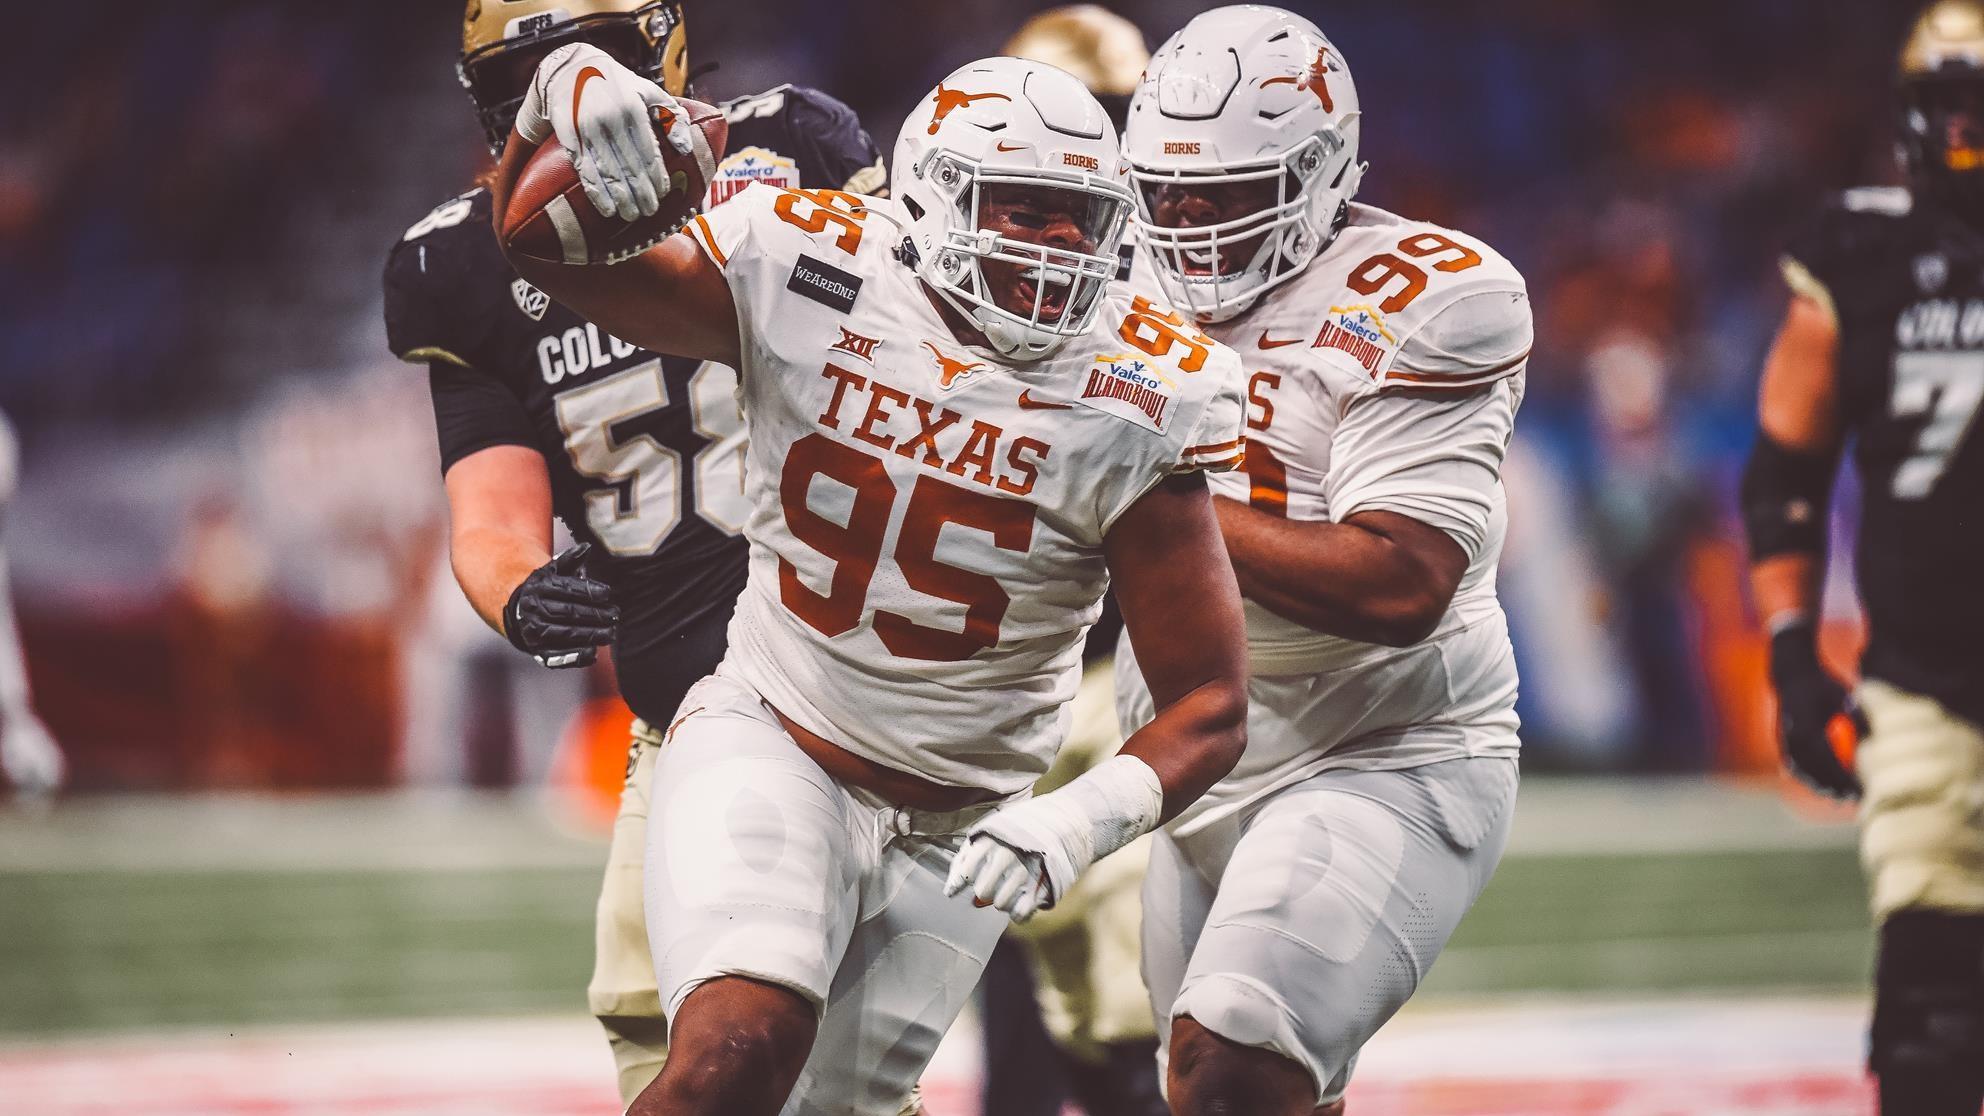 Alfred Collins is a versatile lineman for the Texas Longhorns who exhibits above-average play strength and excellent length. Senior Hula Bowl scout Mike Bey breaks down Collins as an NFL Prospect in his report.